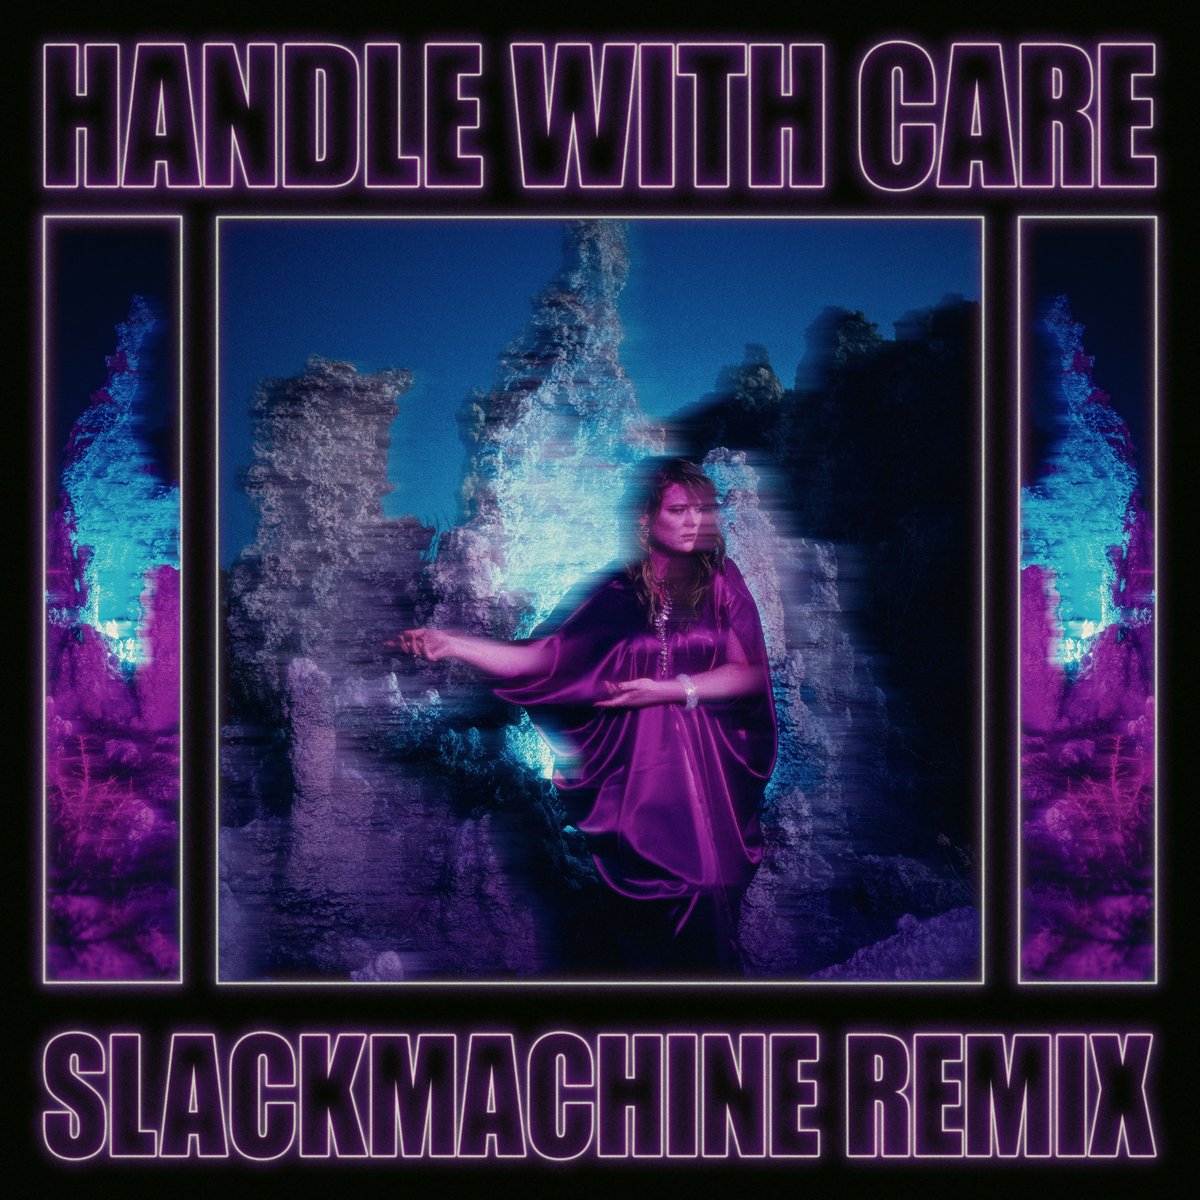 Returning to planet Earth, get ready to hear ‘Handle With Care’ remixed and re-interpreted for the dance floor by the one and only @SLACKMACHINE. It lands on Friday, November 24th! 🛸 Pre-order: parallels.bandcamp.com/album/handle-w… Artwork Photography & Design: @bradakinnan